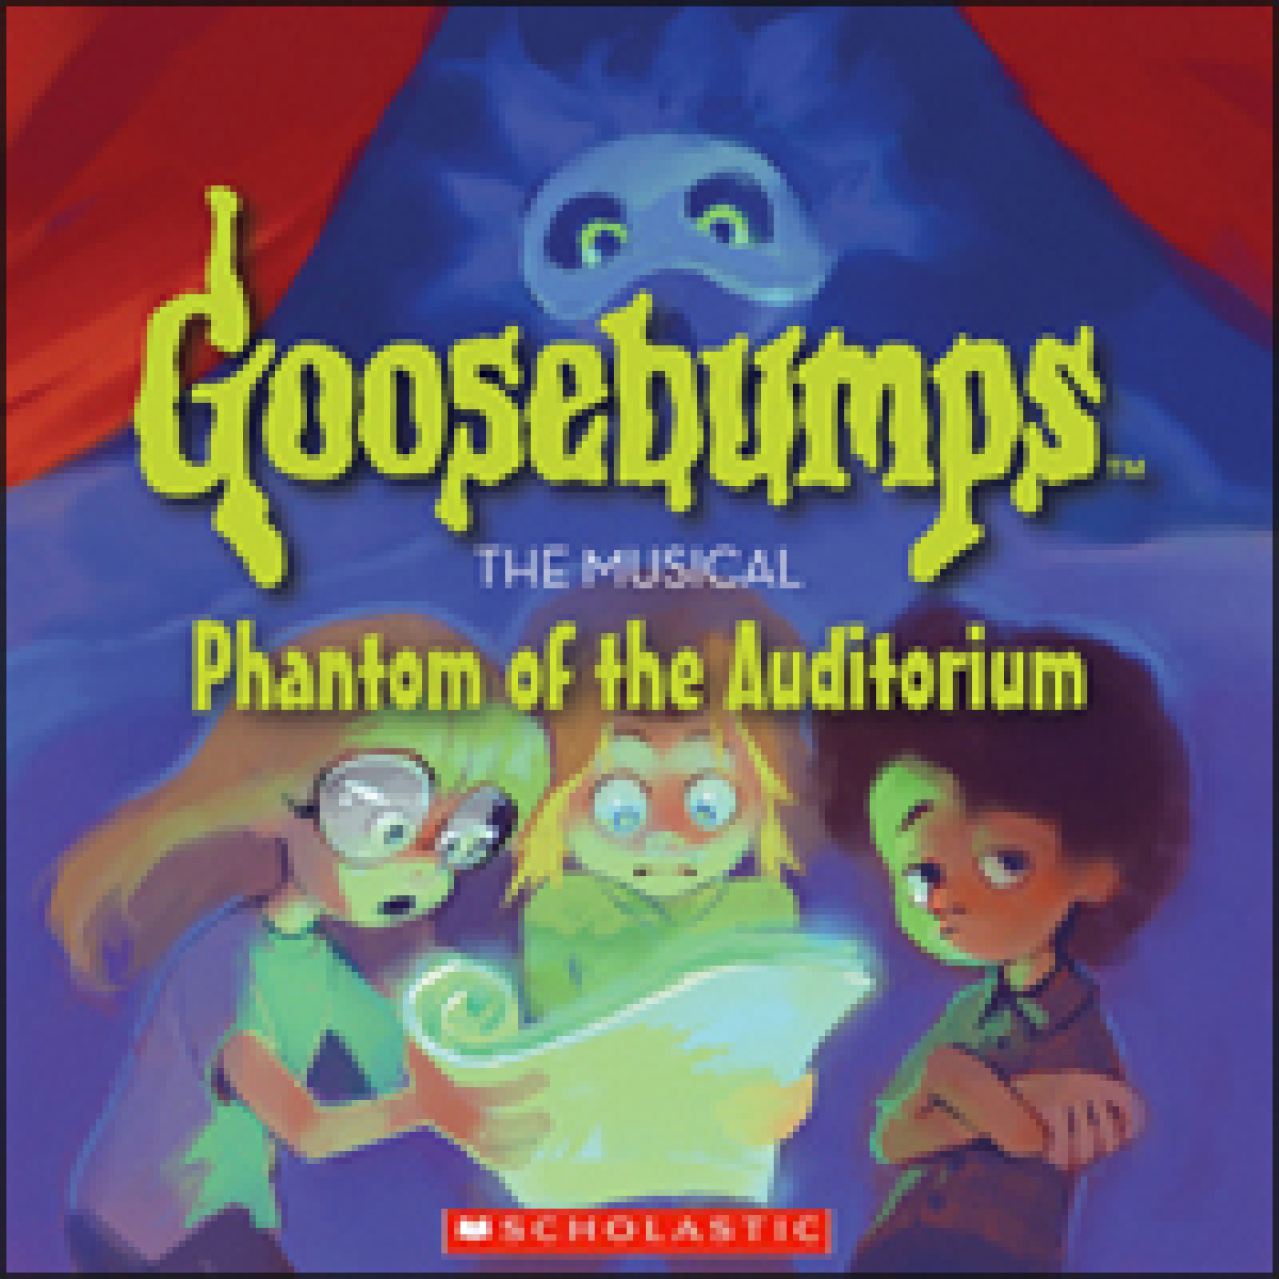 goosebumps the musical phantom of the auditorium logo Broadway shows and tickets